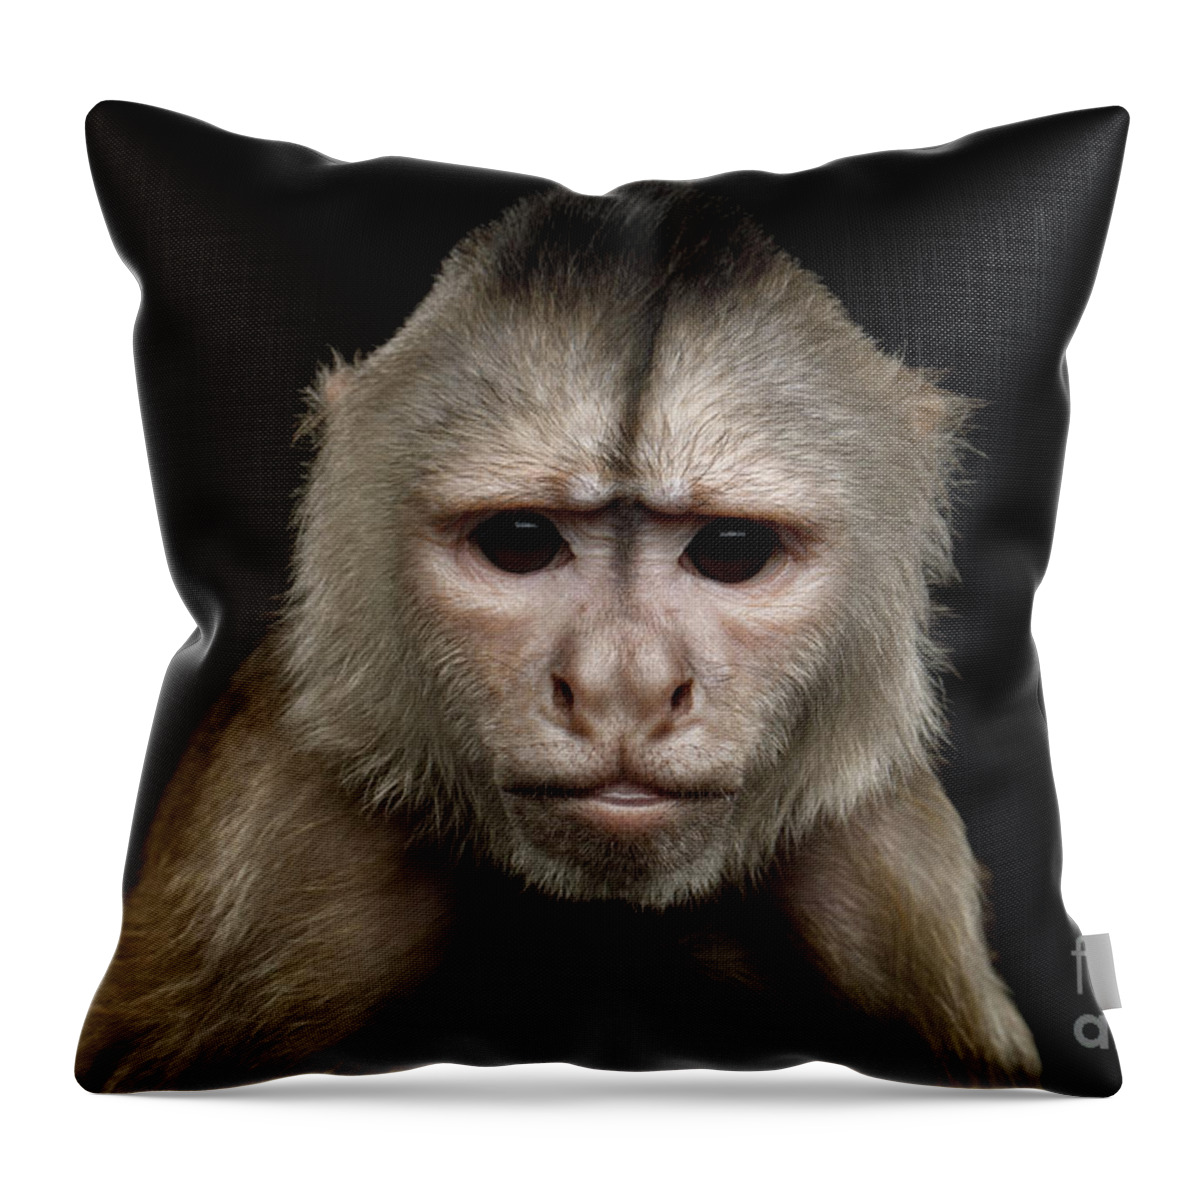 Capuchin Throw Pillow featuring the photograph Angry Capuchin by Sergey Taran